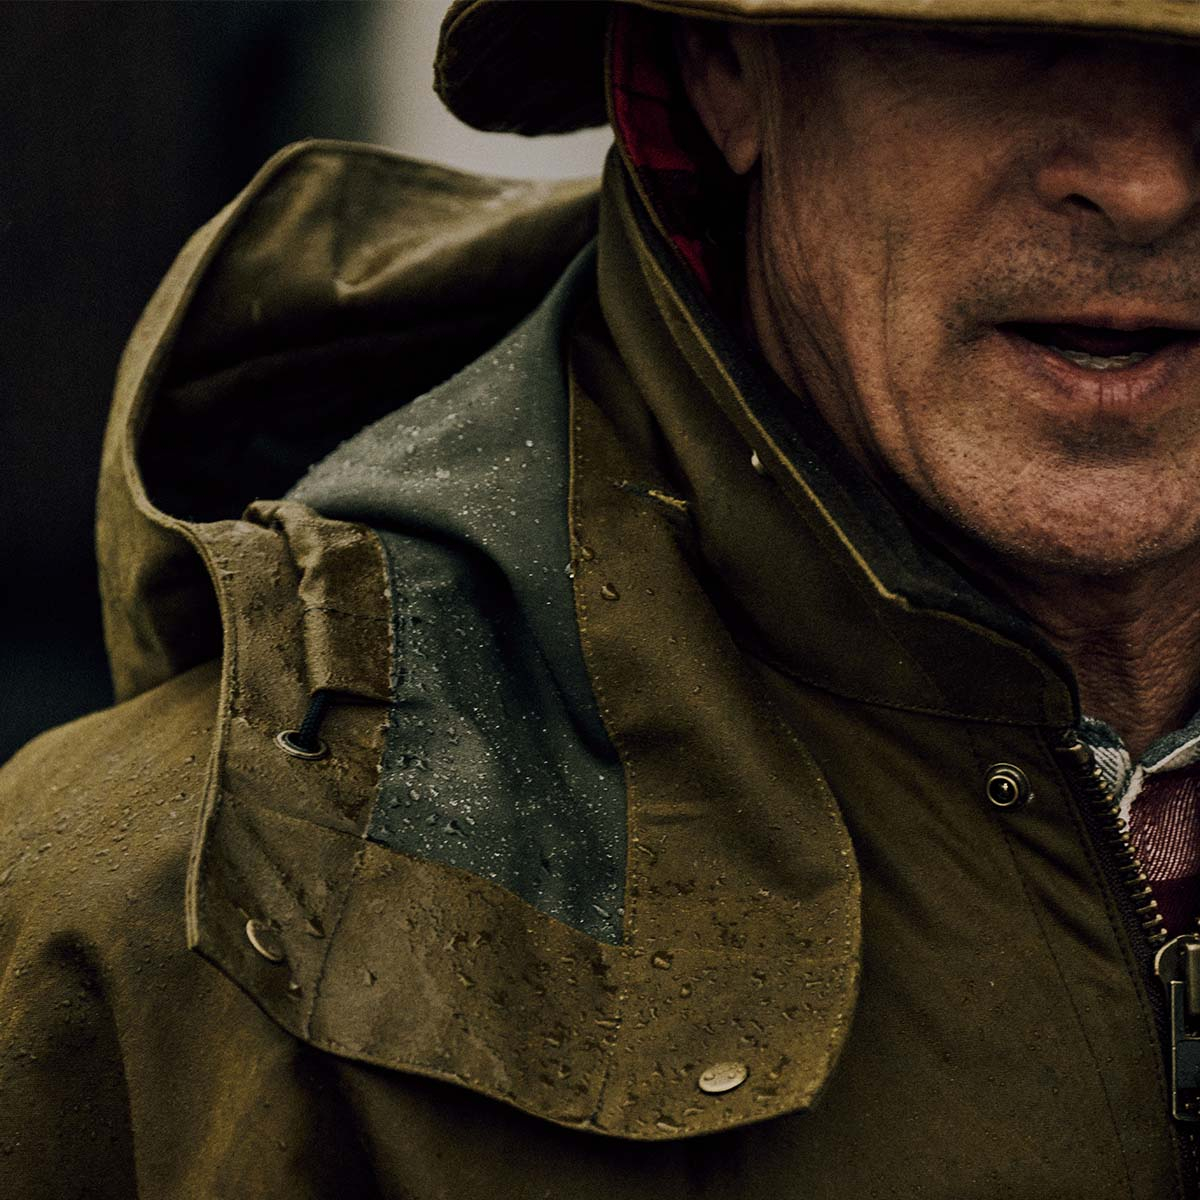 Filson Foul Weather Jacket Dark Tan, Might as well have the best